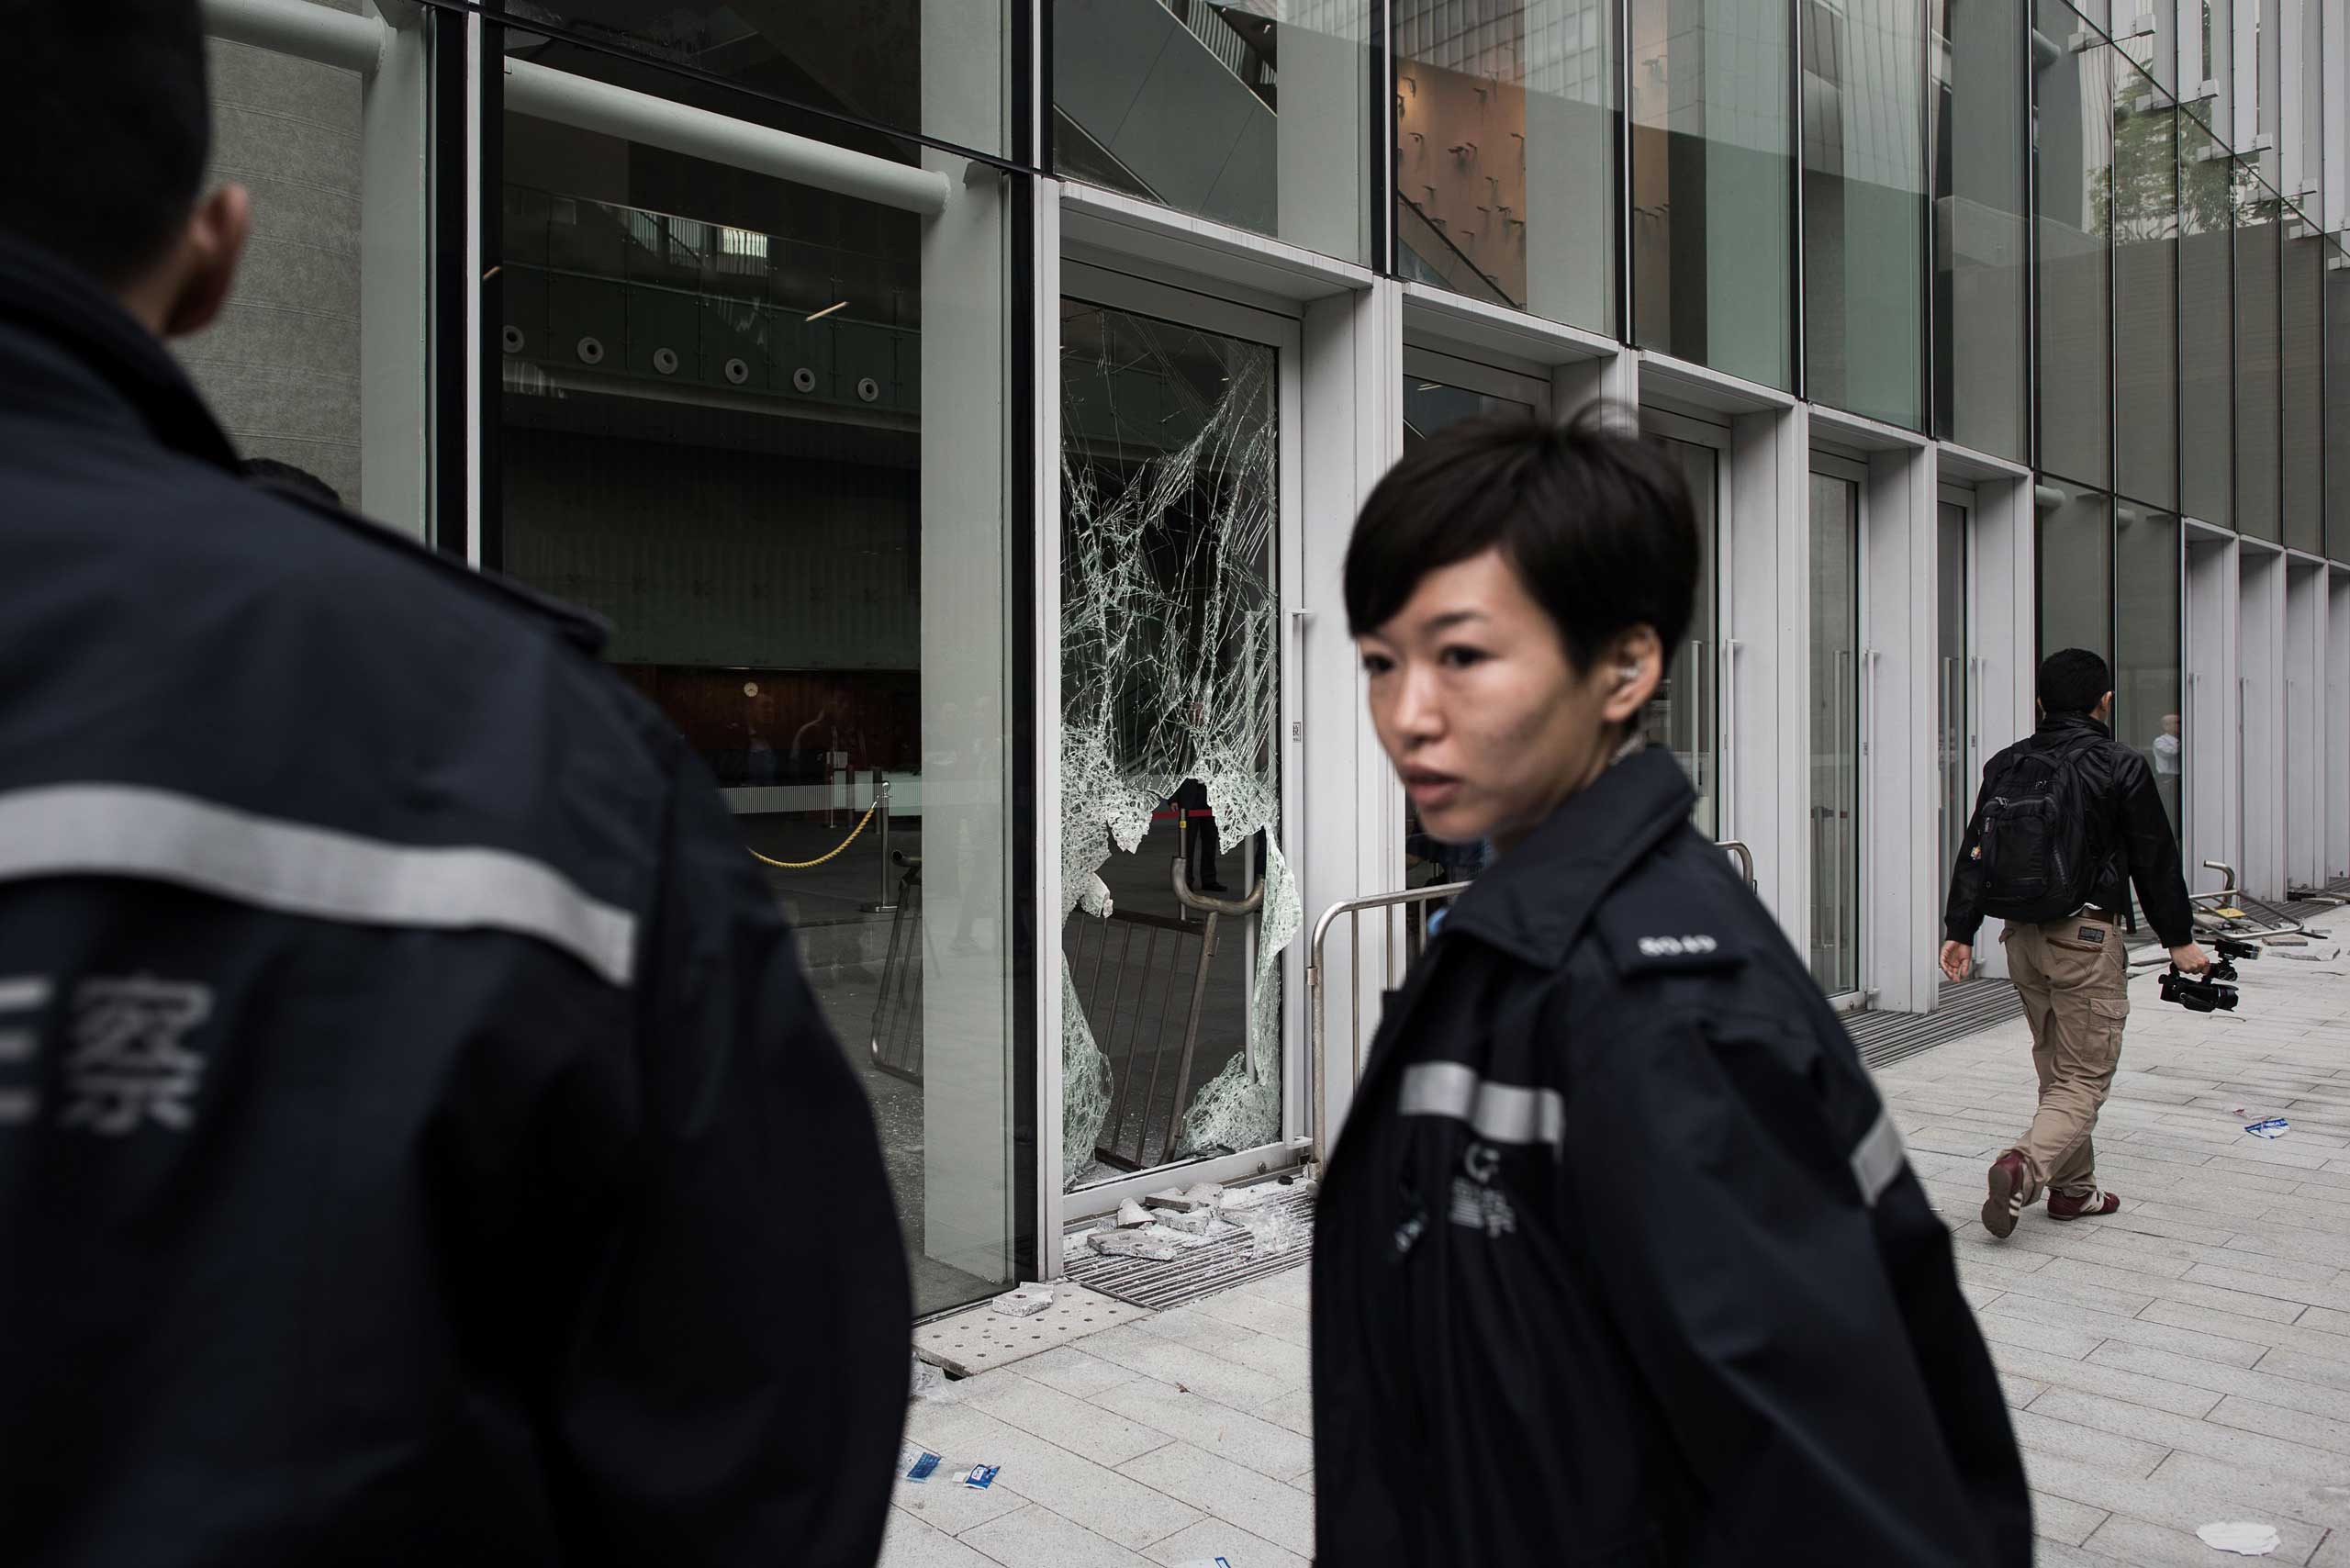 A policewoman stands by a broken window of the government headquarters building in the Admiralty district of Hong Kong on Nov. 19, 2014, after a small group attempted to break into the city's legislature.